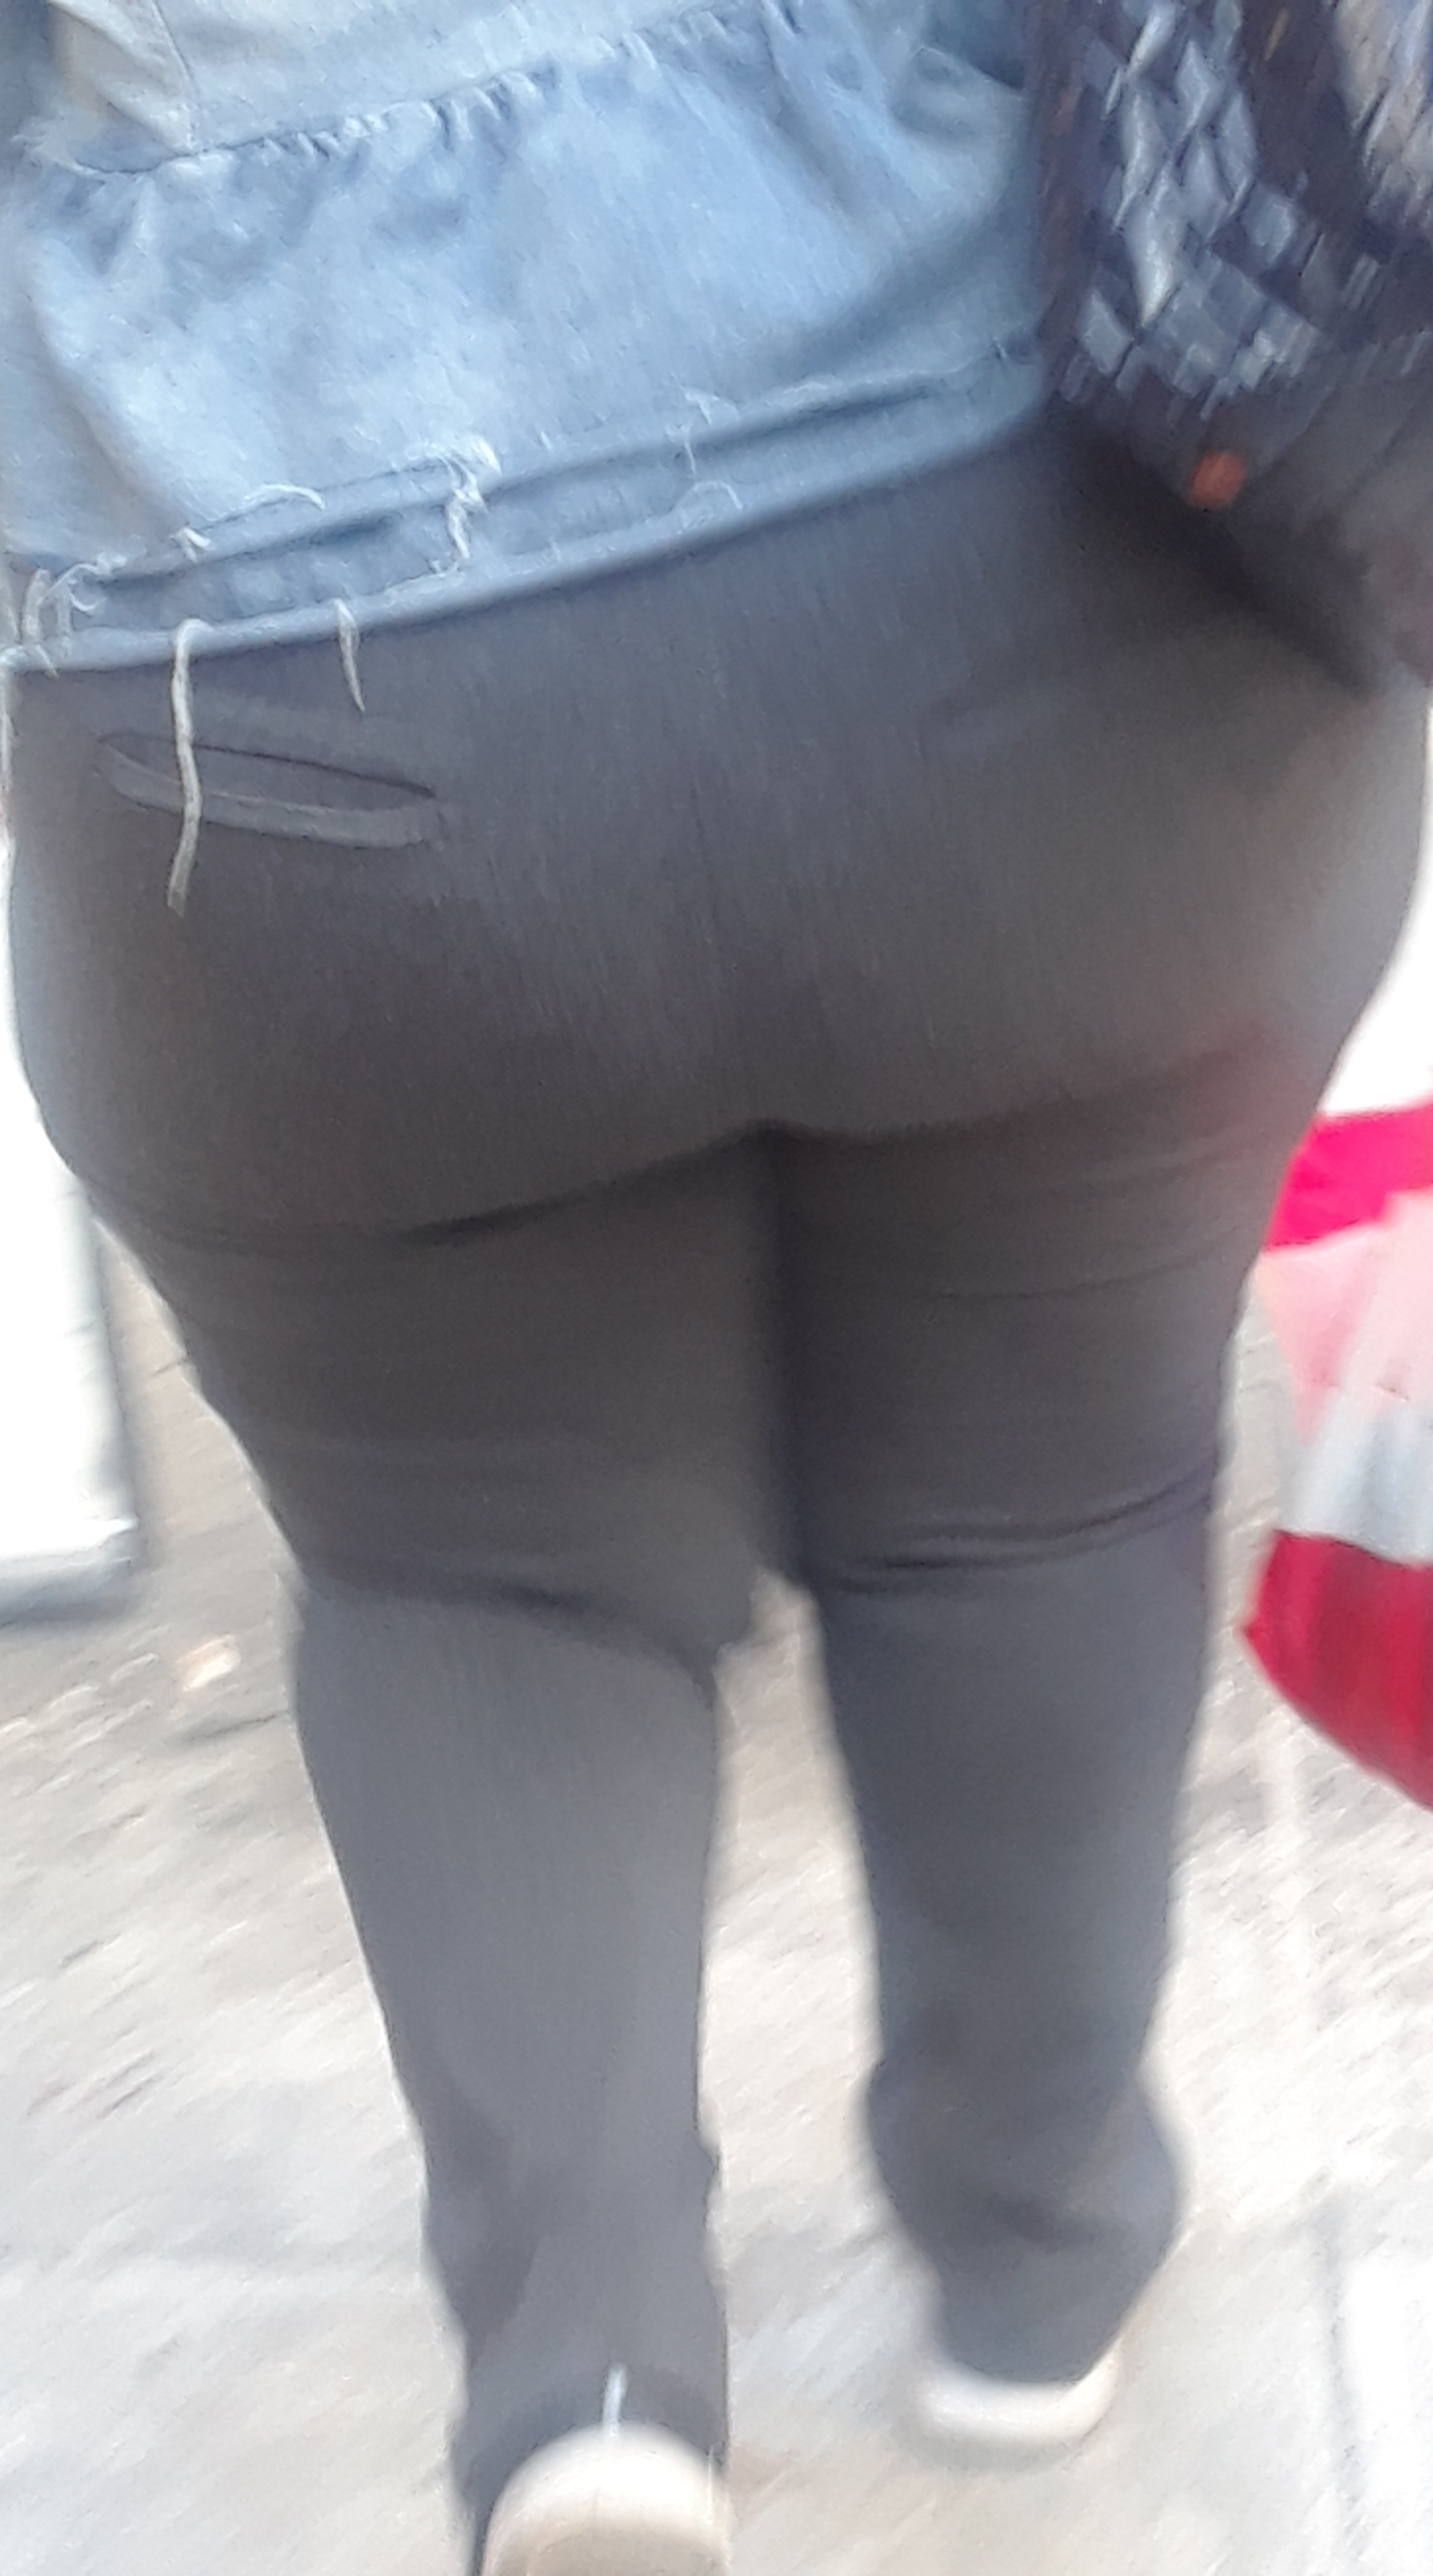 Best Booty Ive seen so